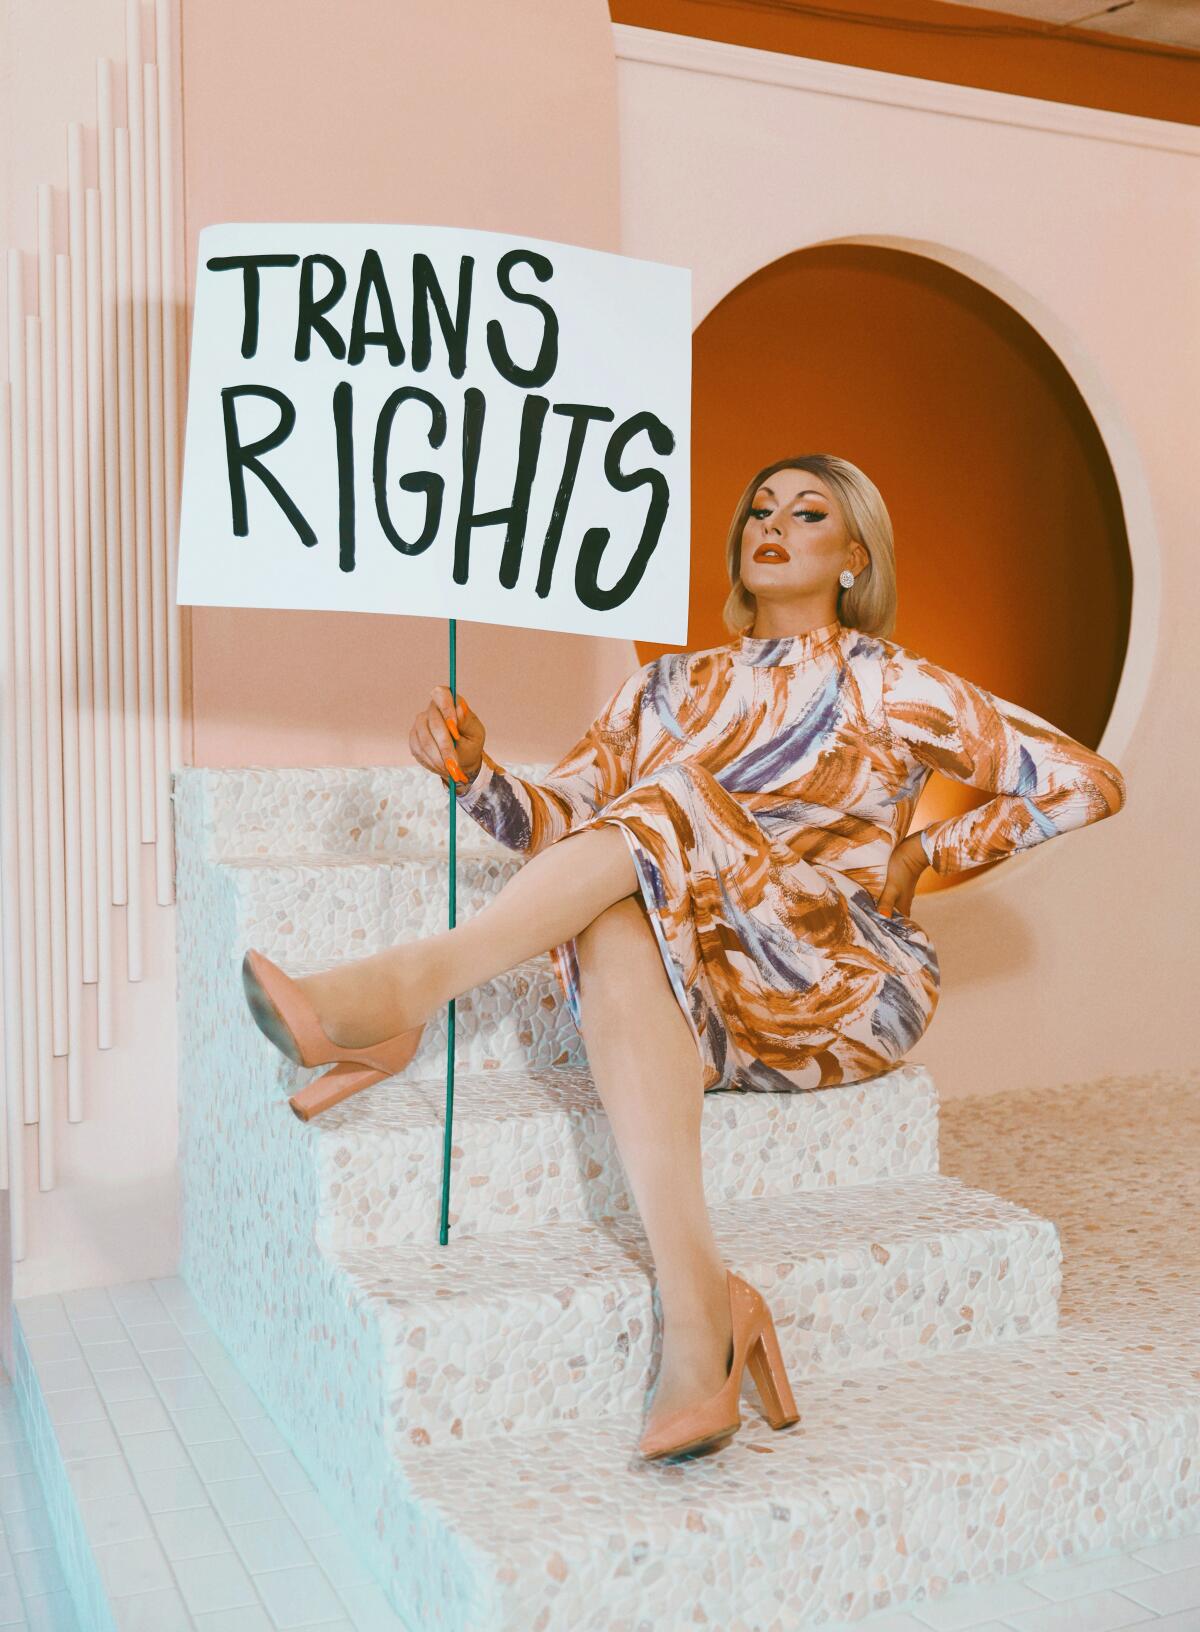 drag queen holds up a sign saying, "Trans rights"